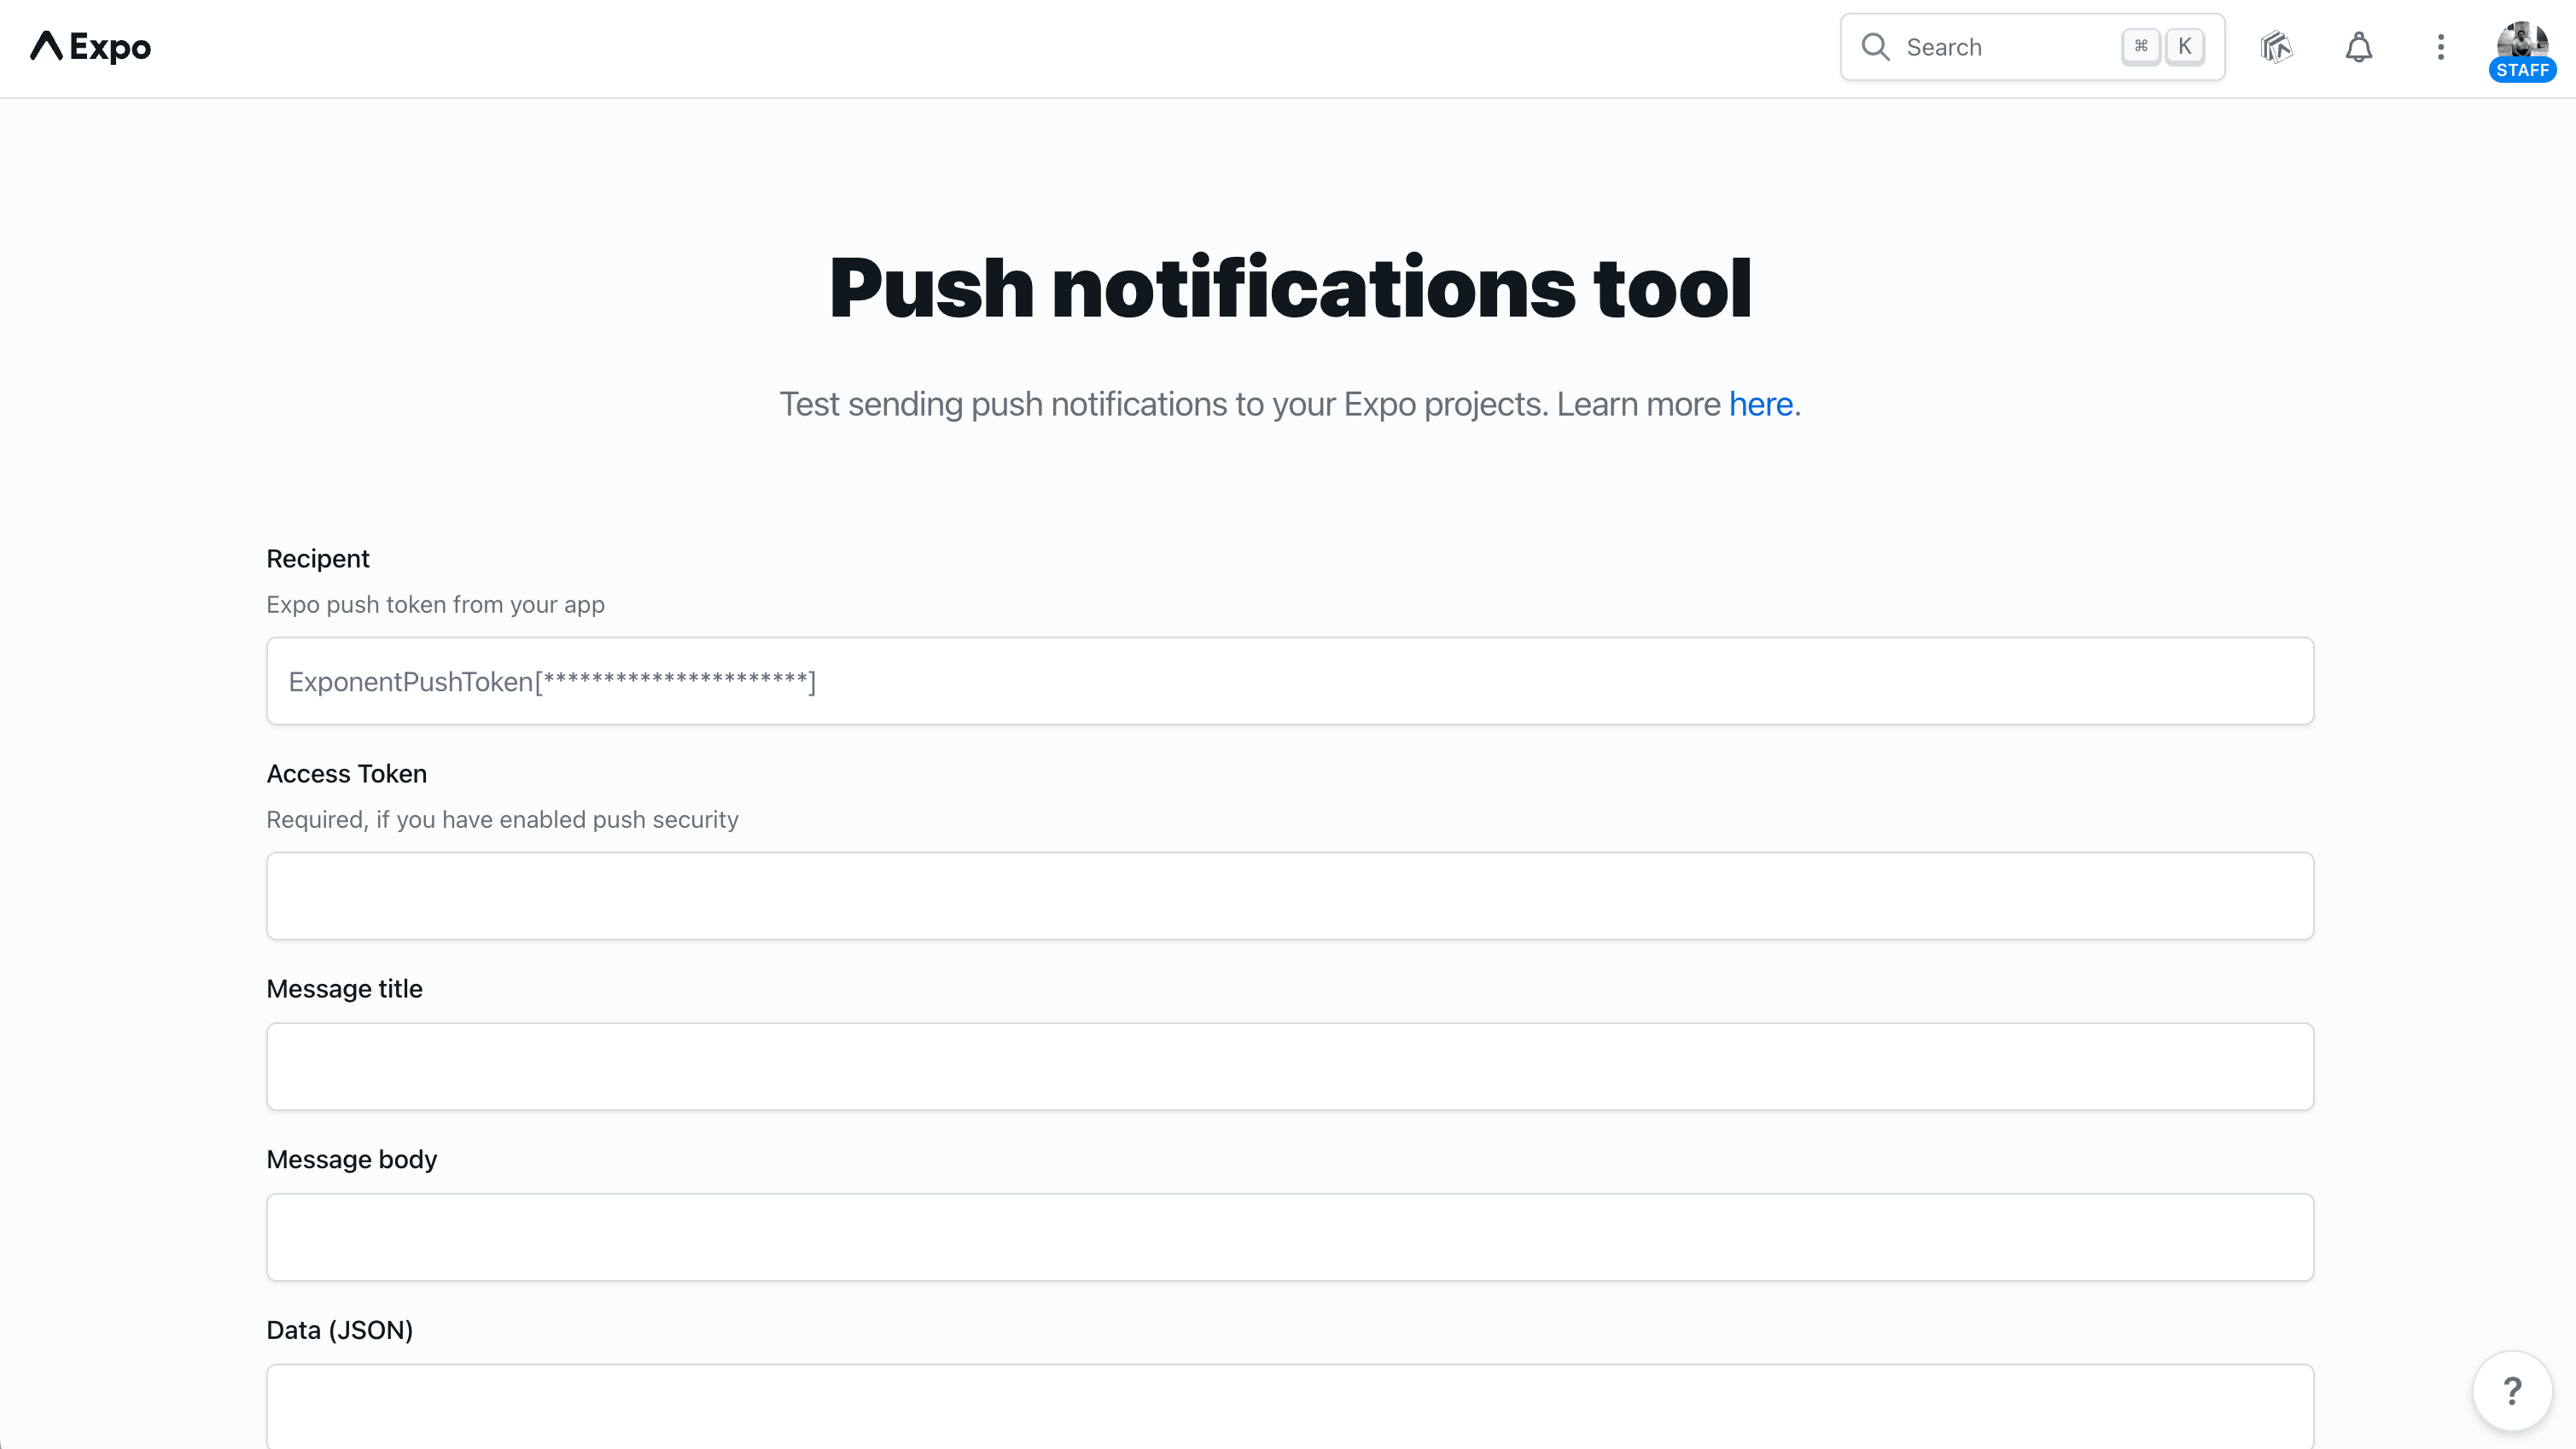 Expo push notifications tool overview.